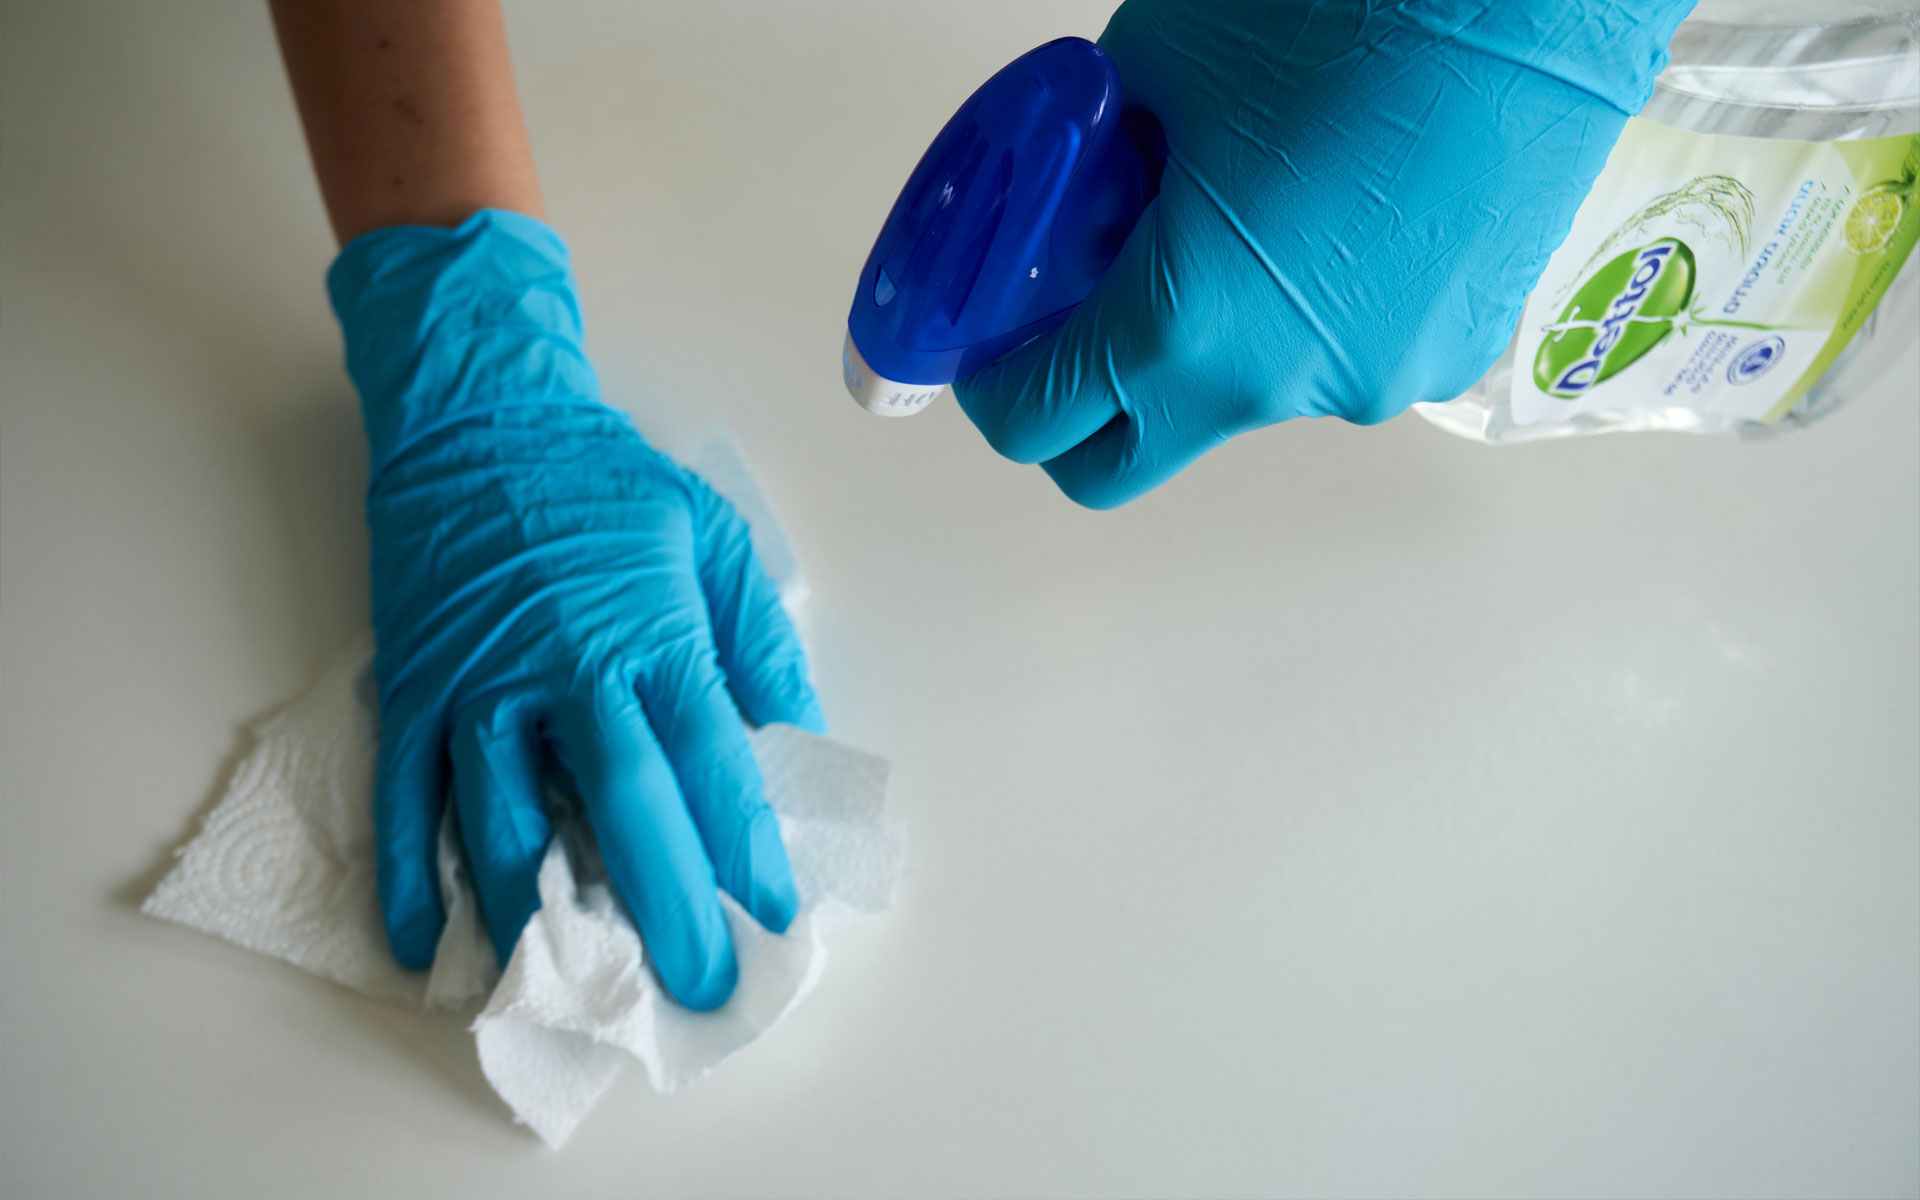 Cleaning services can assist in keeping a good, clean working environment.